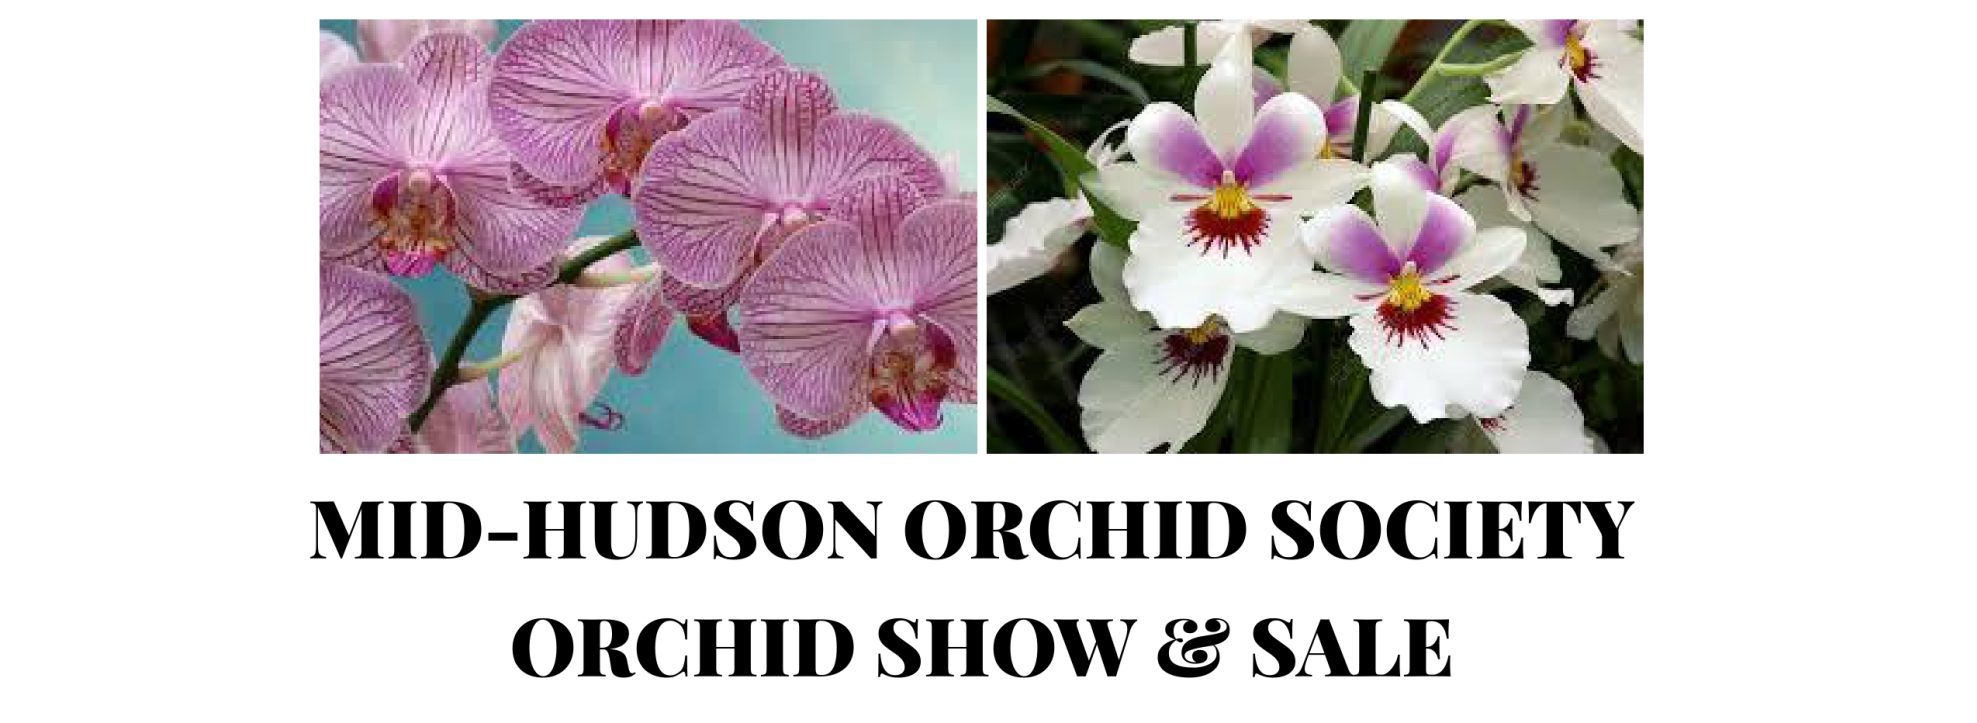 orchid show banner